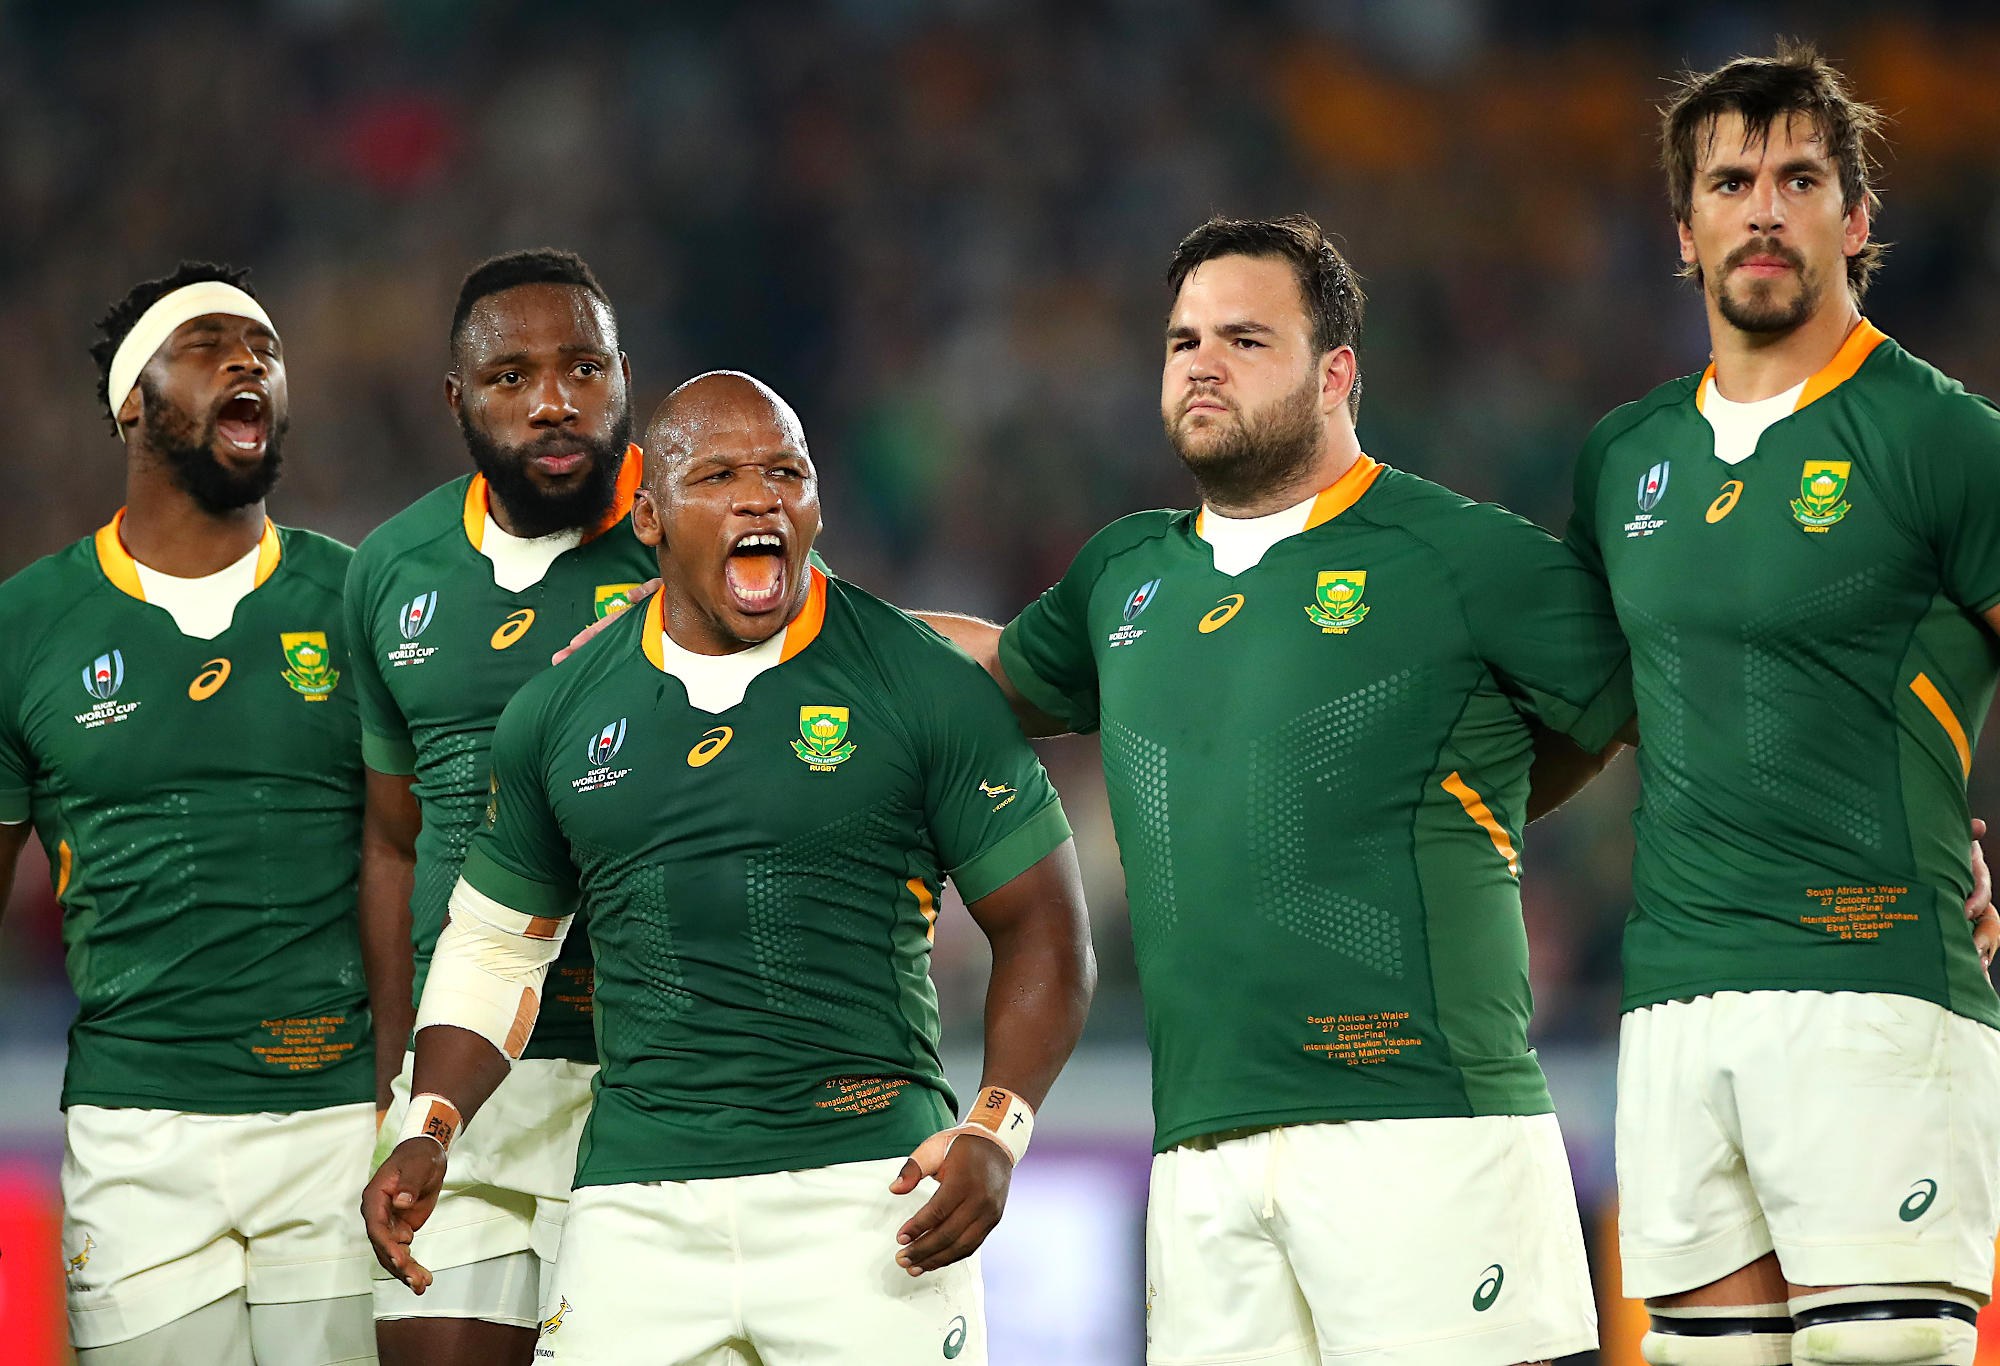 Springboks players after the national anthem